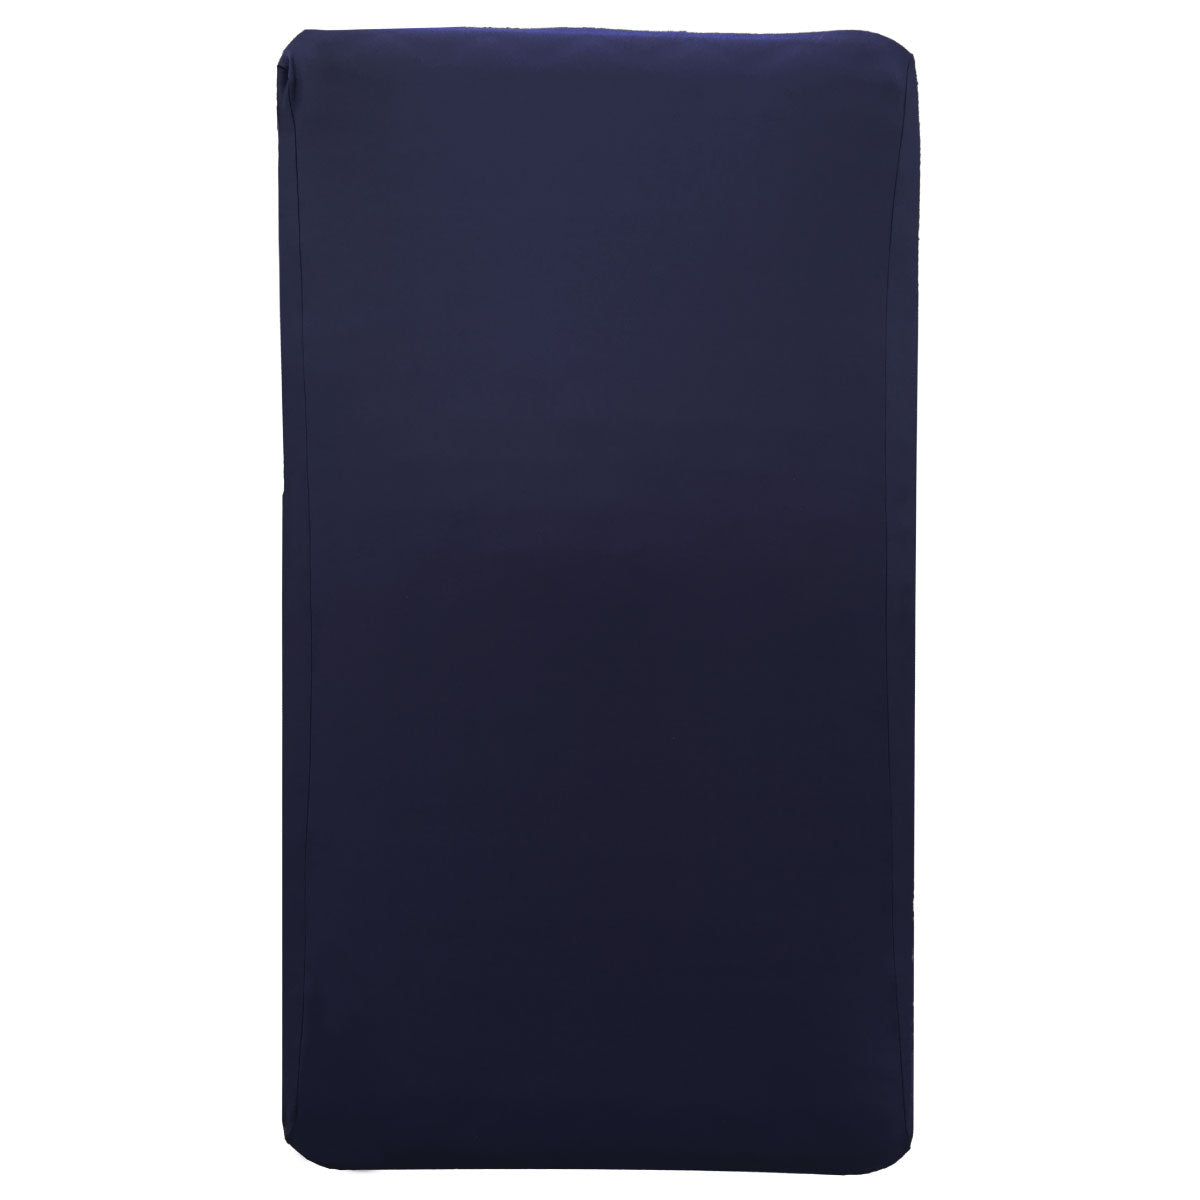 Navy - Sensory Fitted Bed Sheet